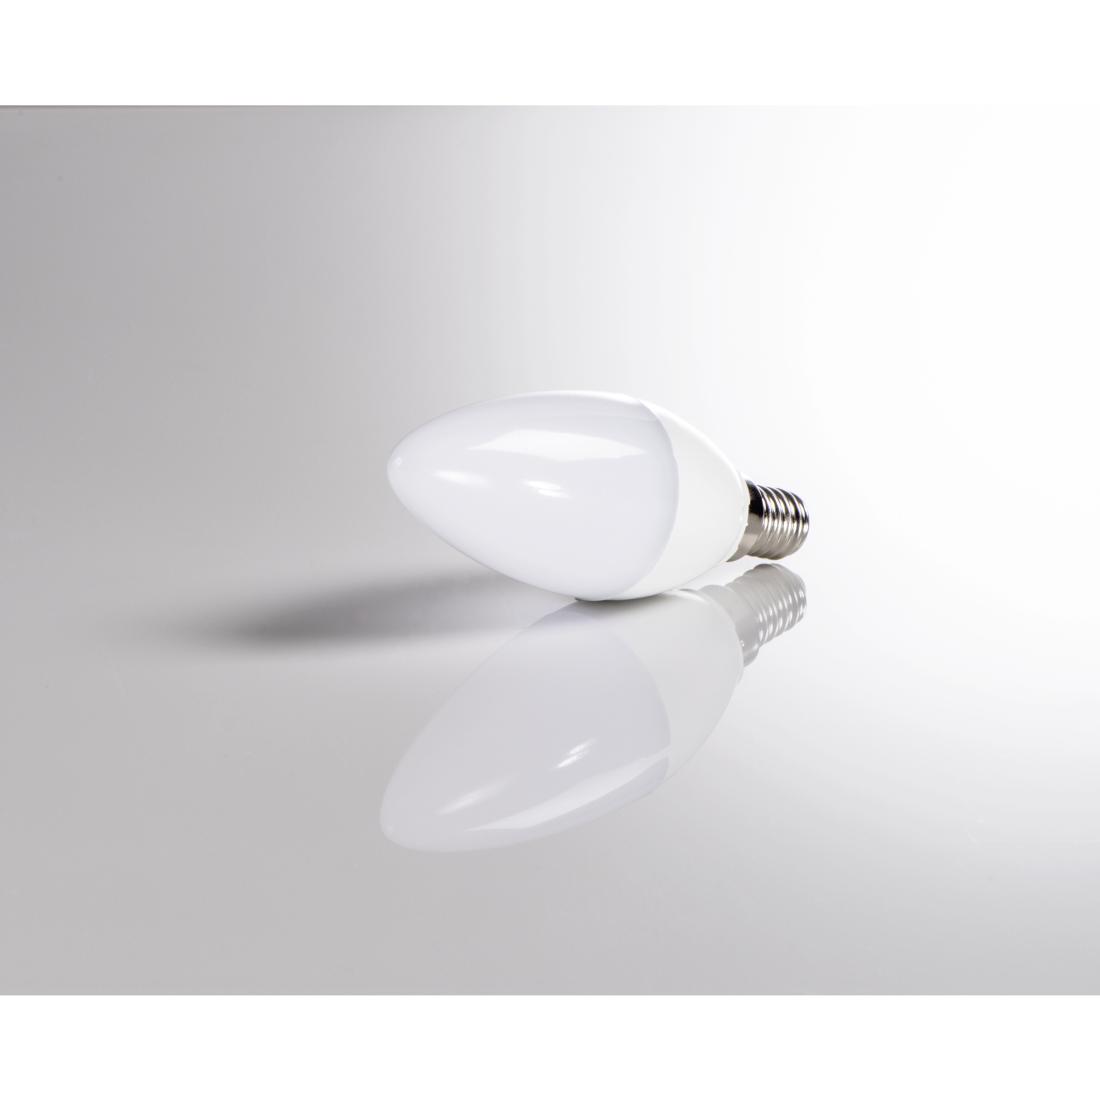 abx3 High-Res Image 3 - Xavax, LED Bulb, E14, 470lm replaces 40W Candle Bulb, daylight